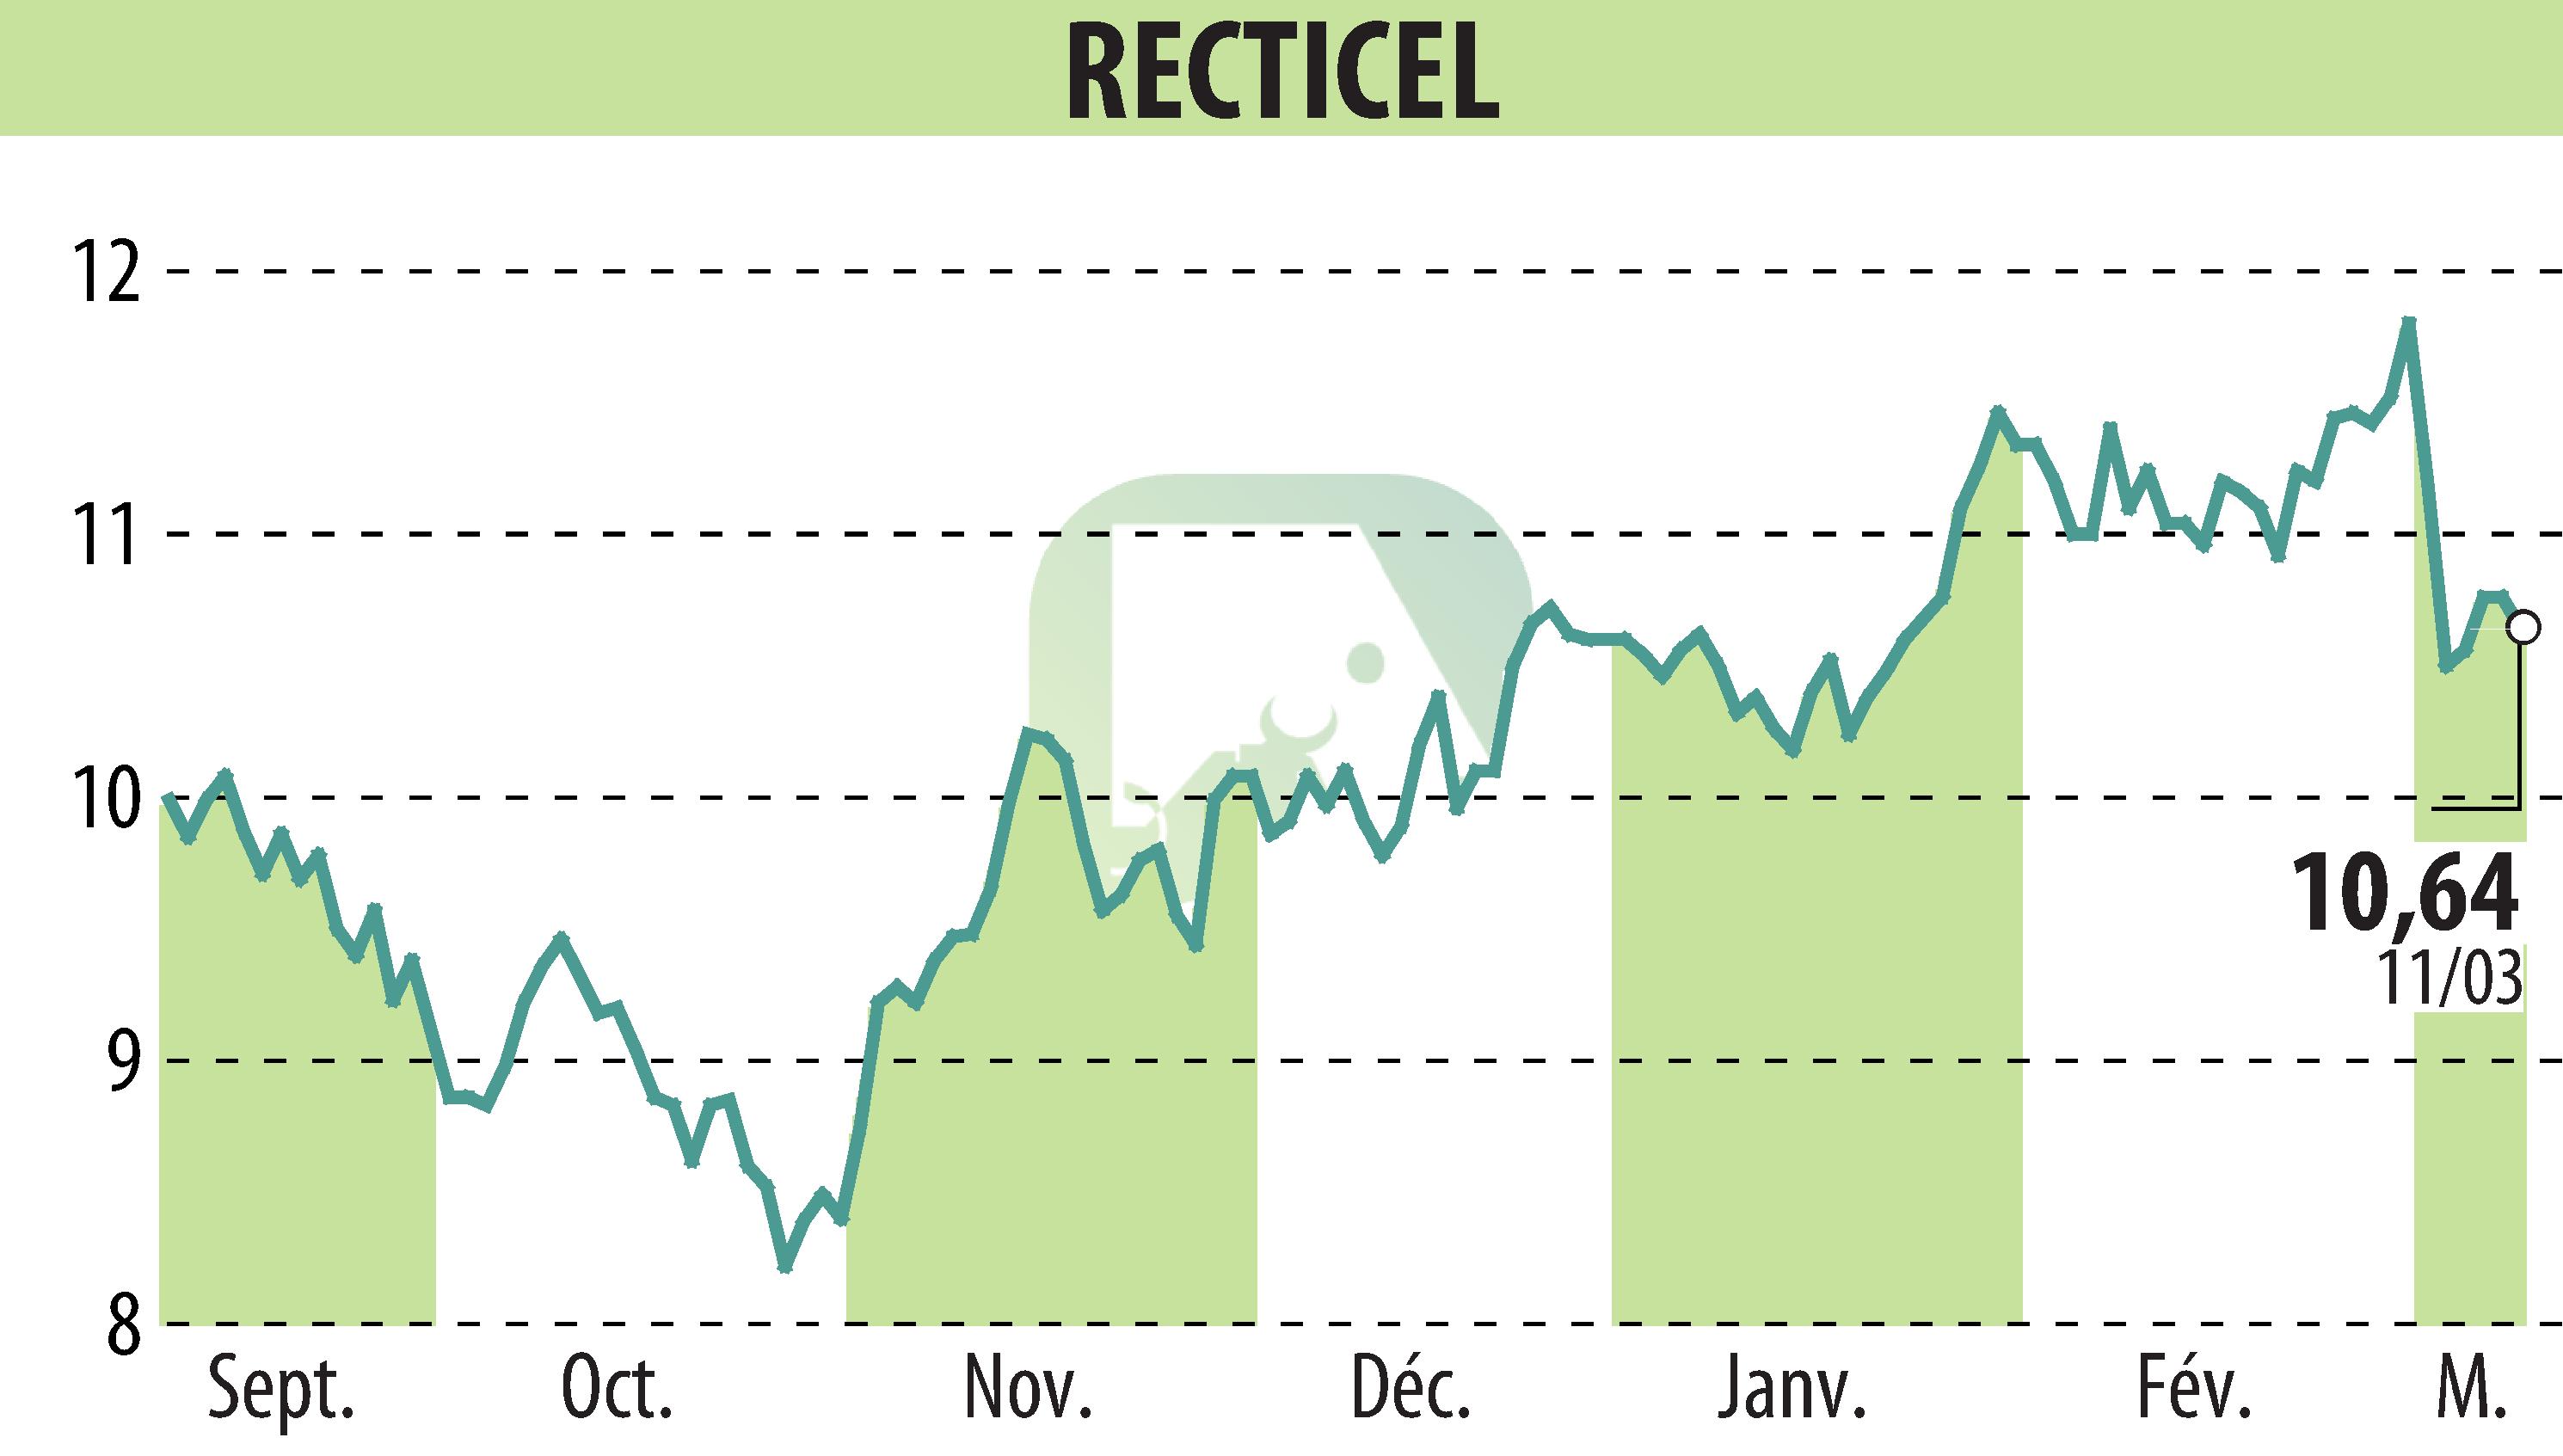 Stock price chart of RECTICEL (EBR:RECT) showing fluctuations.